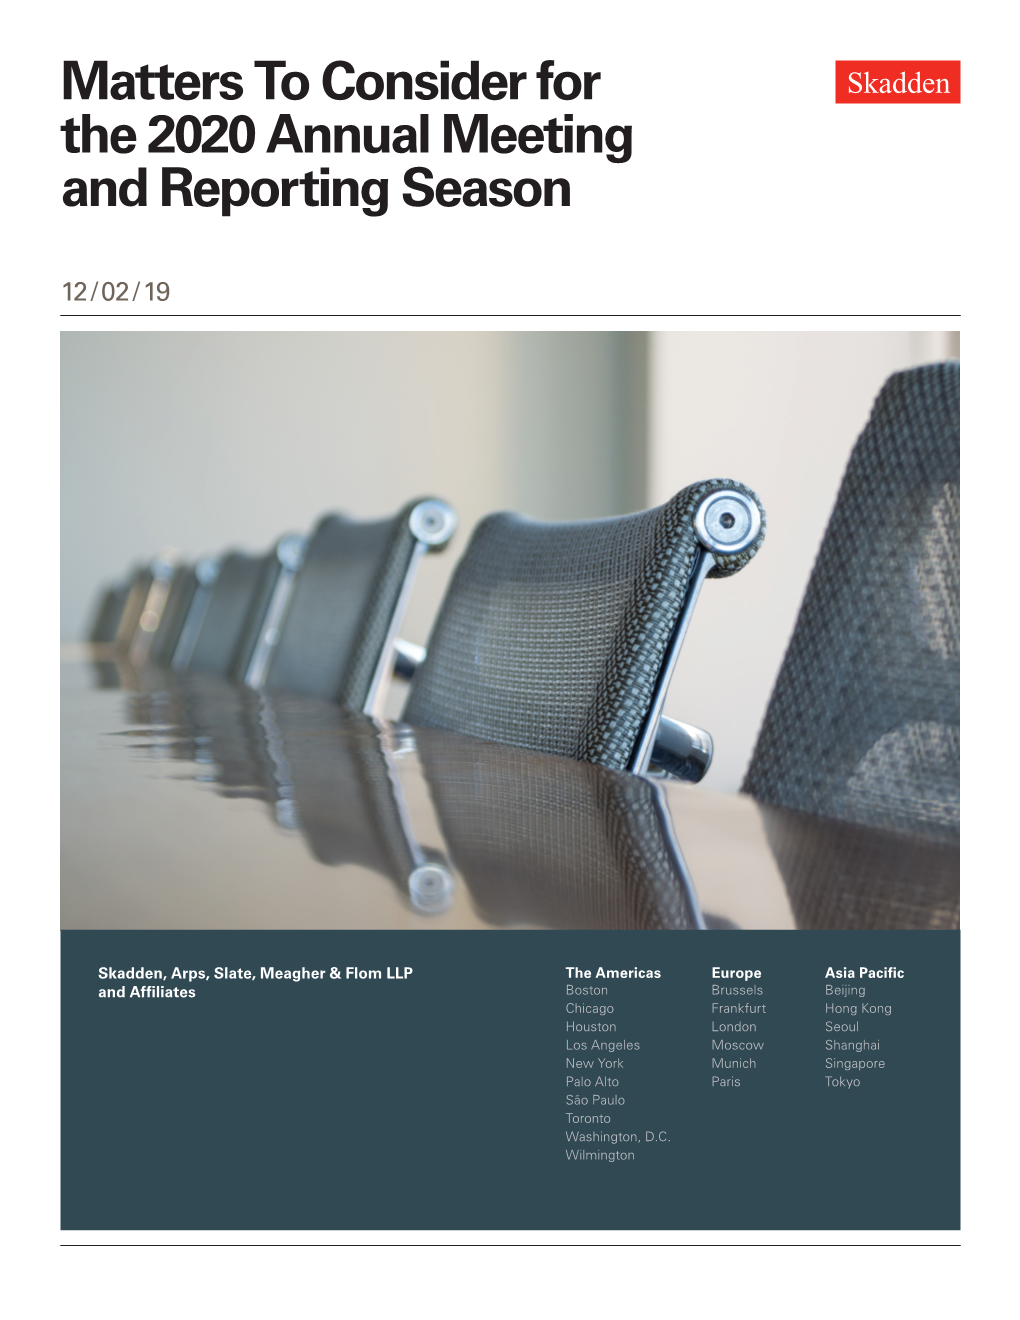 Matters to Consider for the 2020 Annual Meeting and Reporting Season